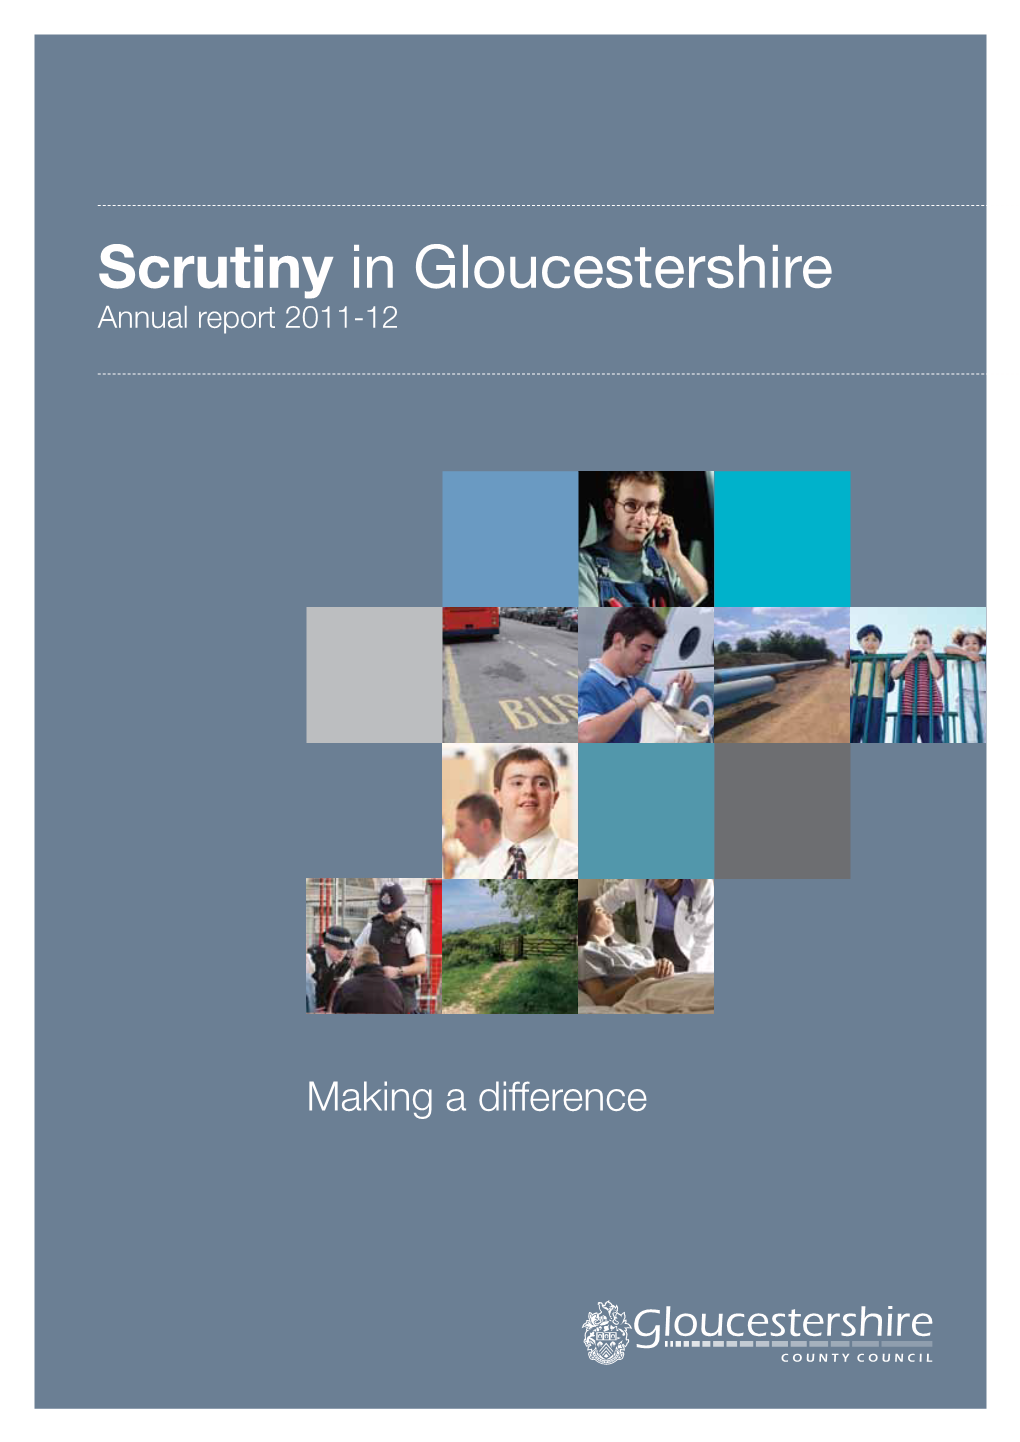 Scrutiny in Gloucestershire Annual Report 2011-12